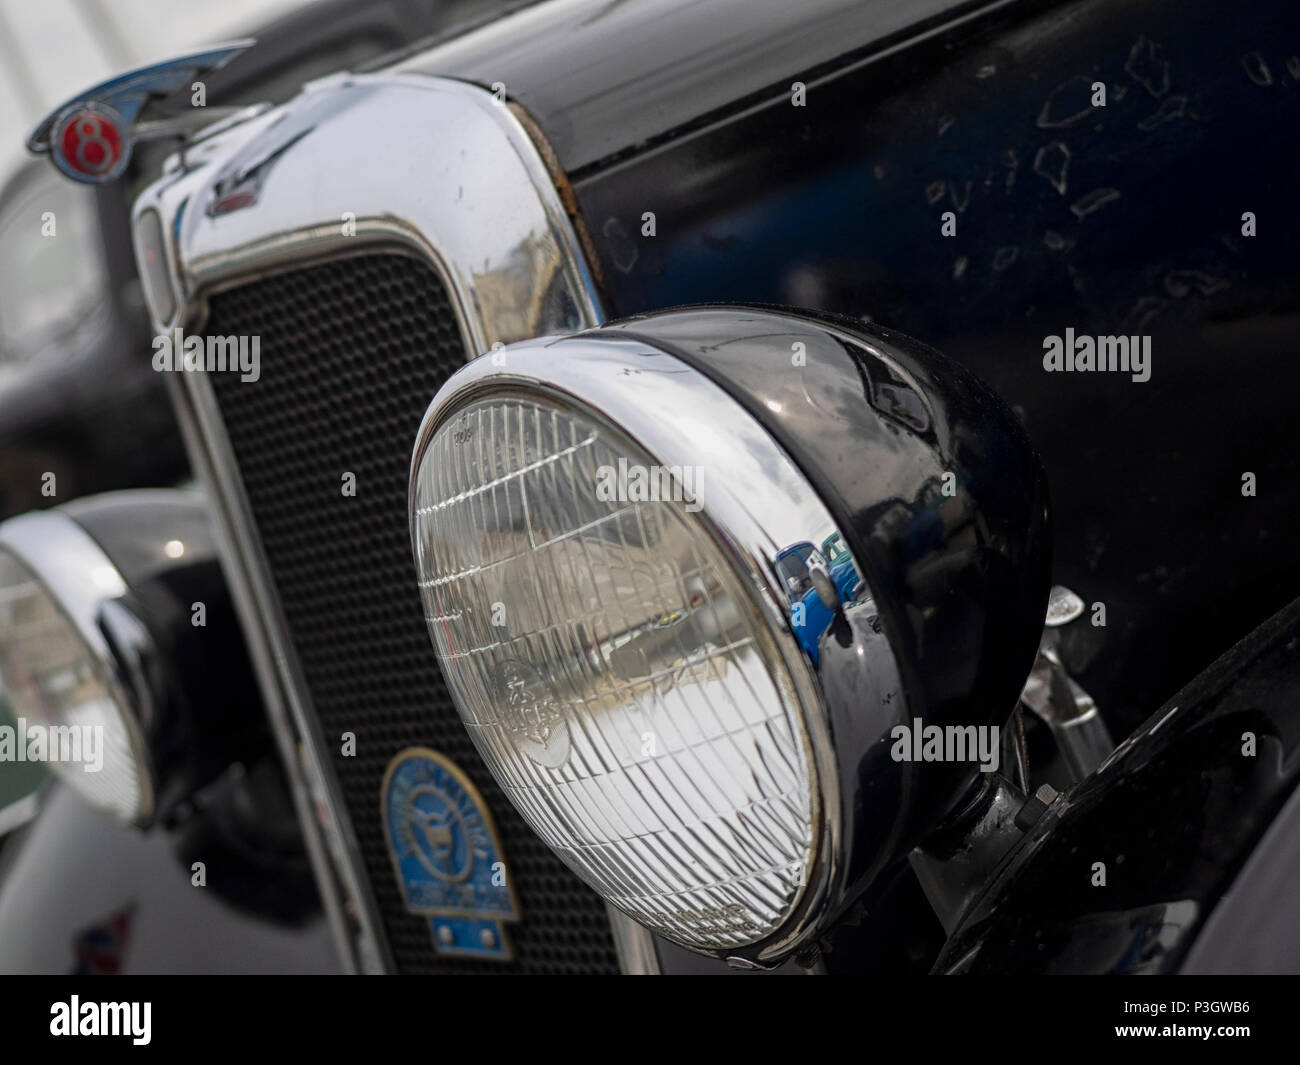 SOUTHEND-ON-SEA, ESSEX, UK - APRIL 15, 2018:  Front detail of Morris 8 Classic Car Stock Photo